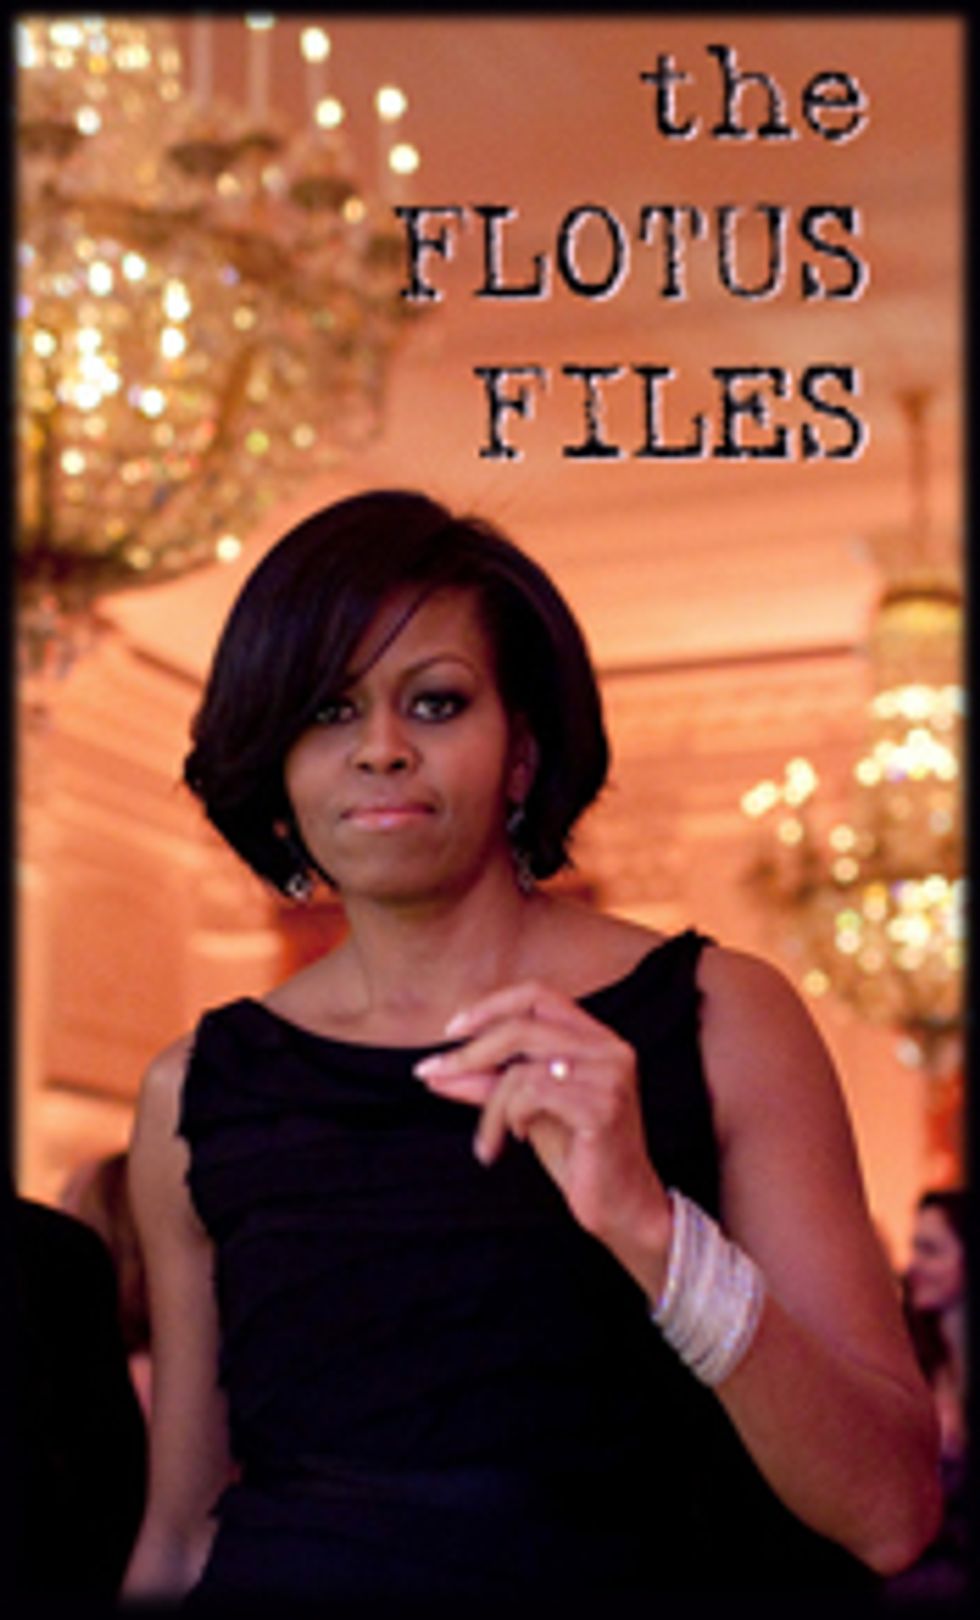 Michelle Obama Does Topless Magazine Cover For Filthy Europeans